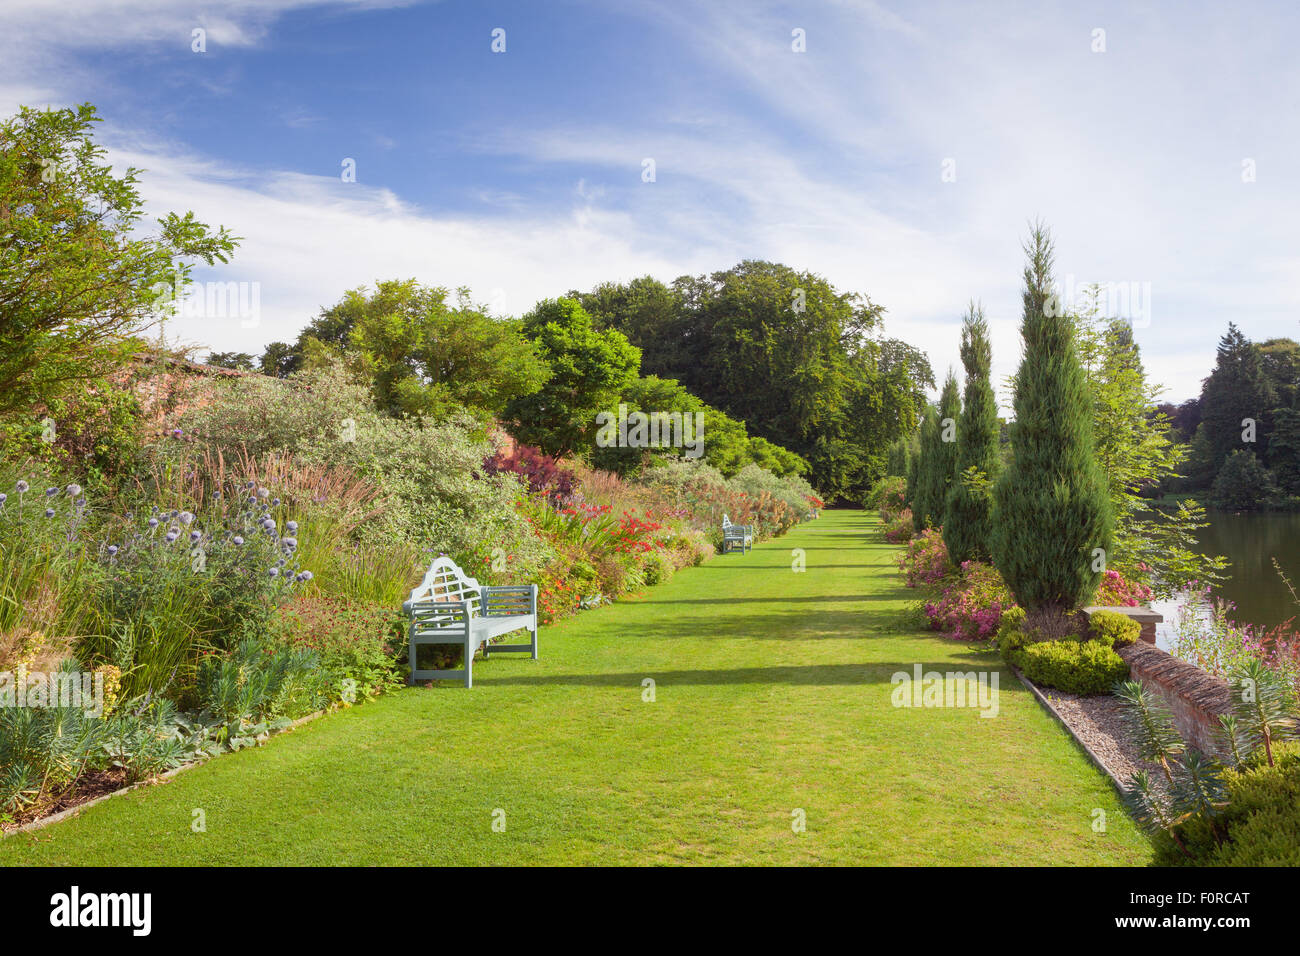 Elsham Hall Gardens and Country Park. Elsham, North Lincolnshire, UK. Summer, August 2015. Stock Photo